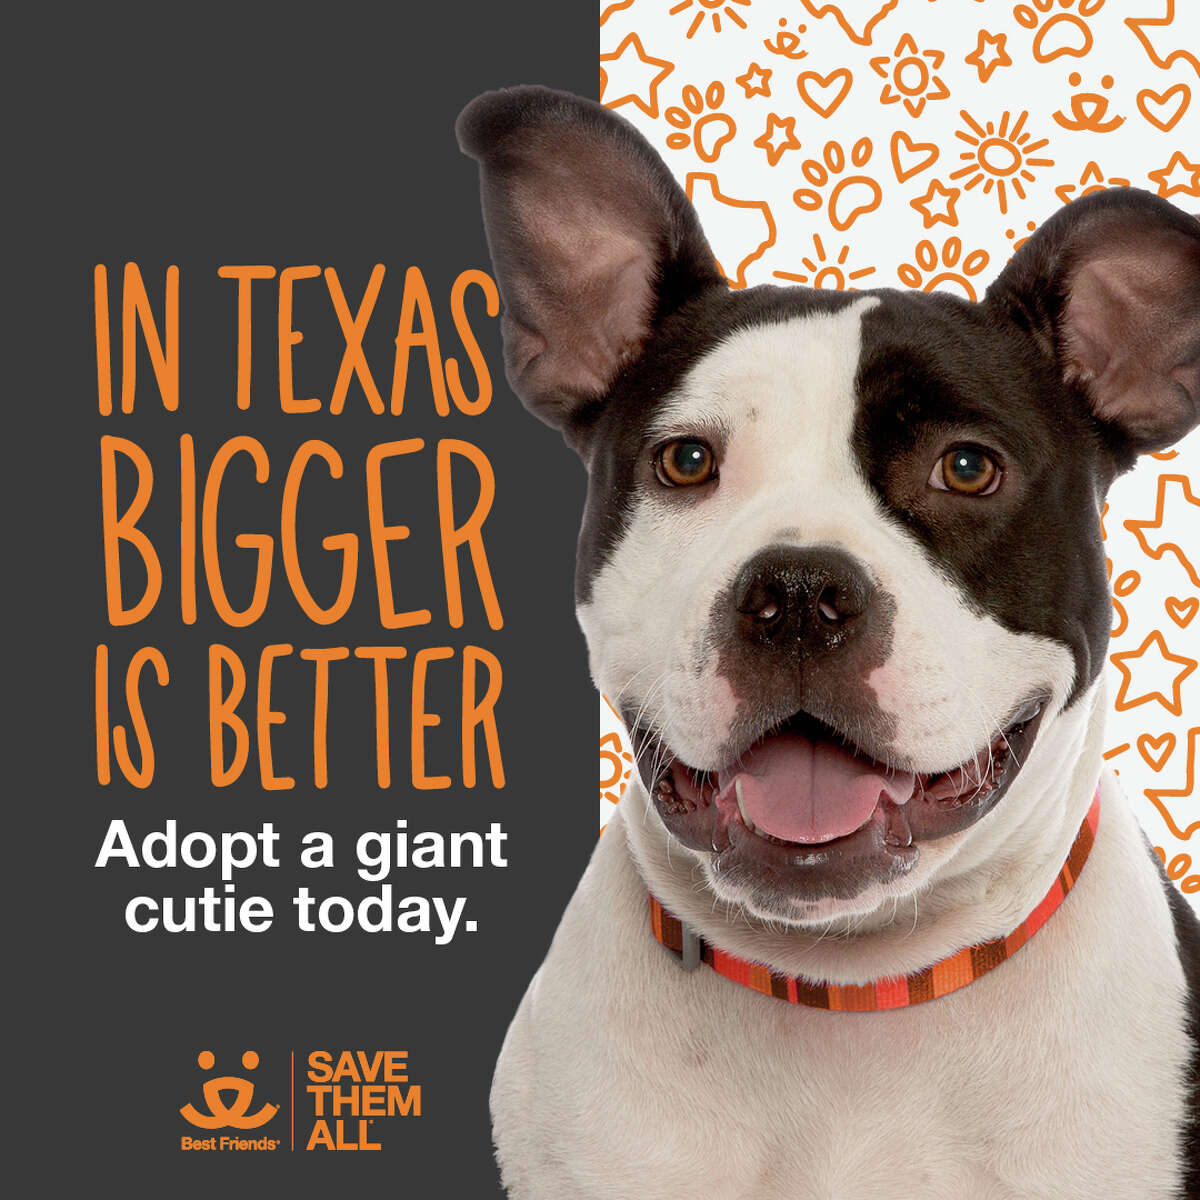 Houston-area pet adoption event aims to save 'big dogs' from animal shelters